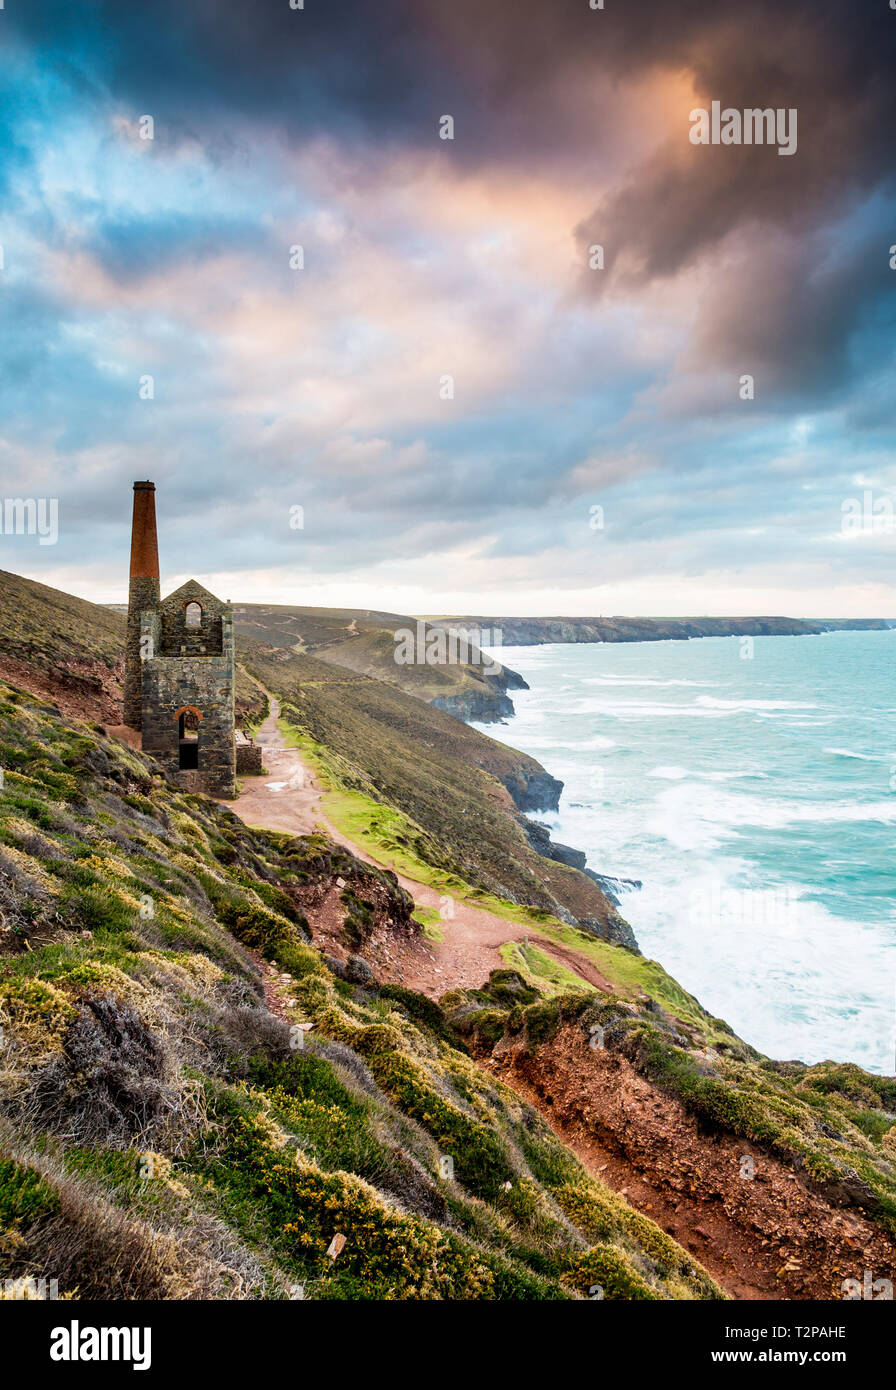 The Towanroath mine shaft at Wheal Coates, on the St Agnes coastline in Cornwall, gives this epic composition with the beautiful rugged Cornish coast Stock Photo